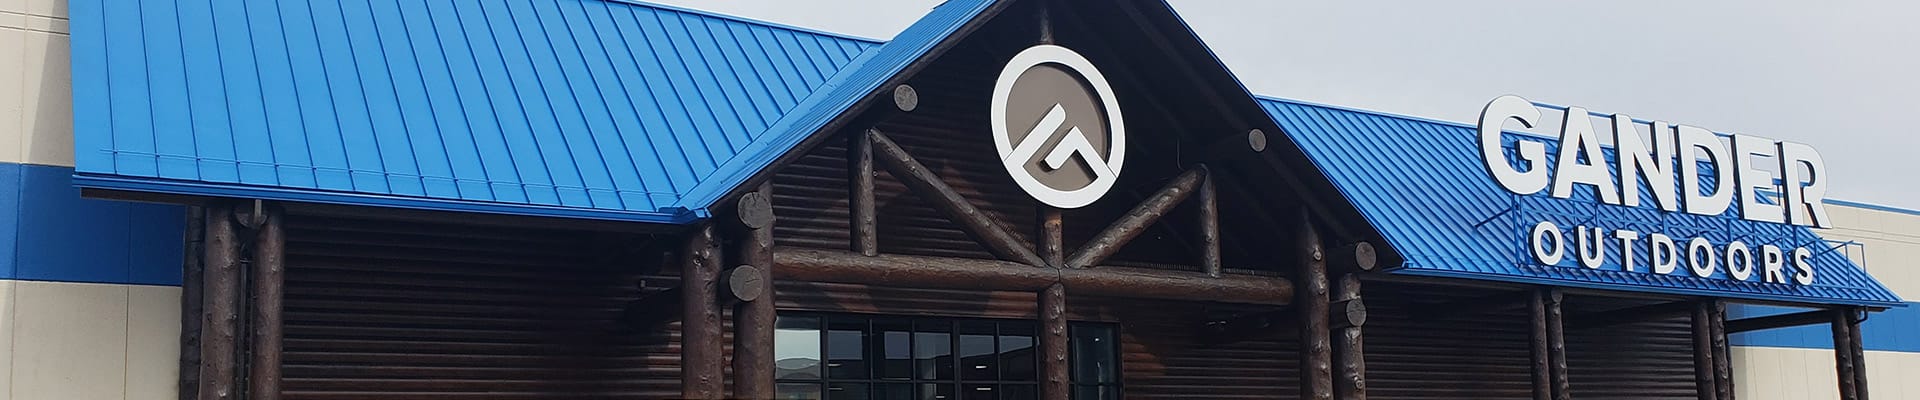 Check out our newly completed buildouts for Gander Outdoors in Cicero, Watertown, and Plattsburgh, NY